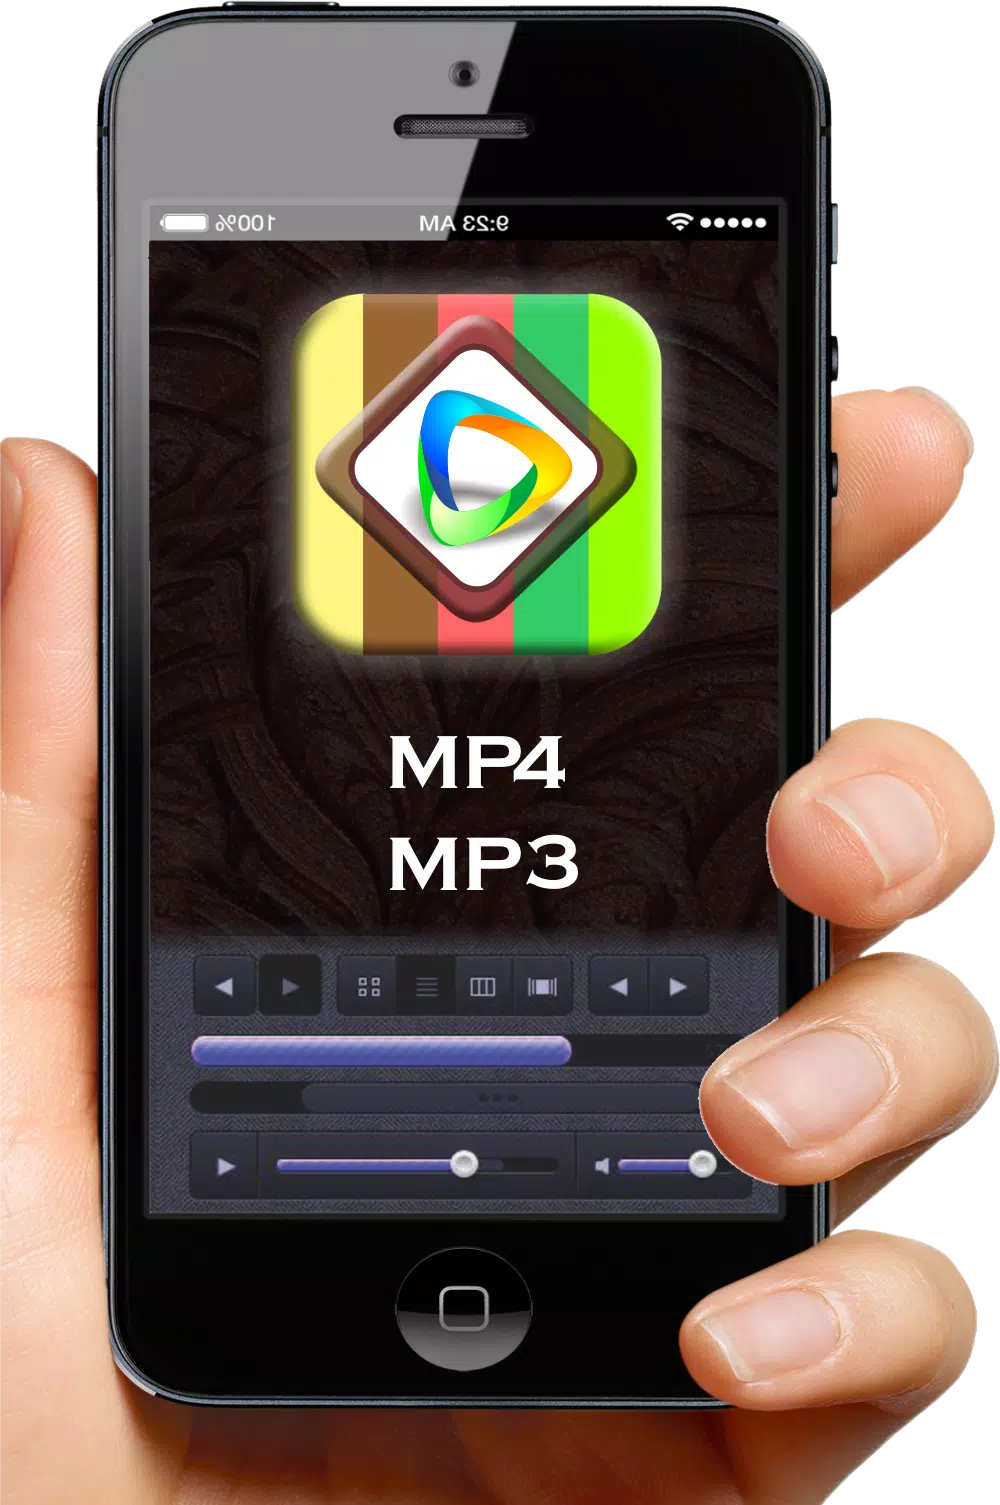 Damso Macarena Songs 2017 APK for Android Download